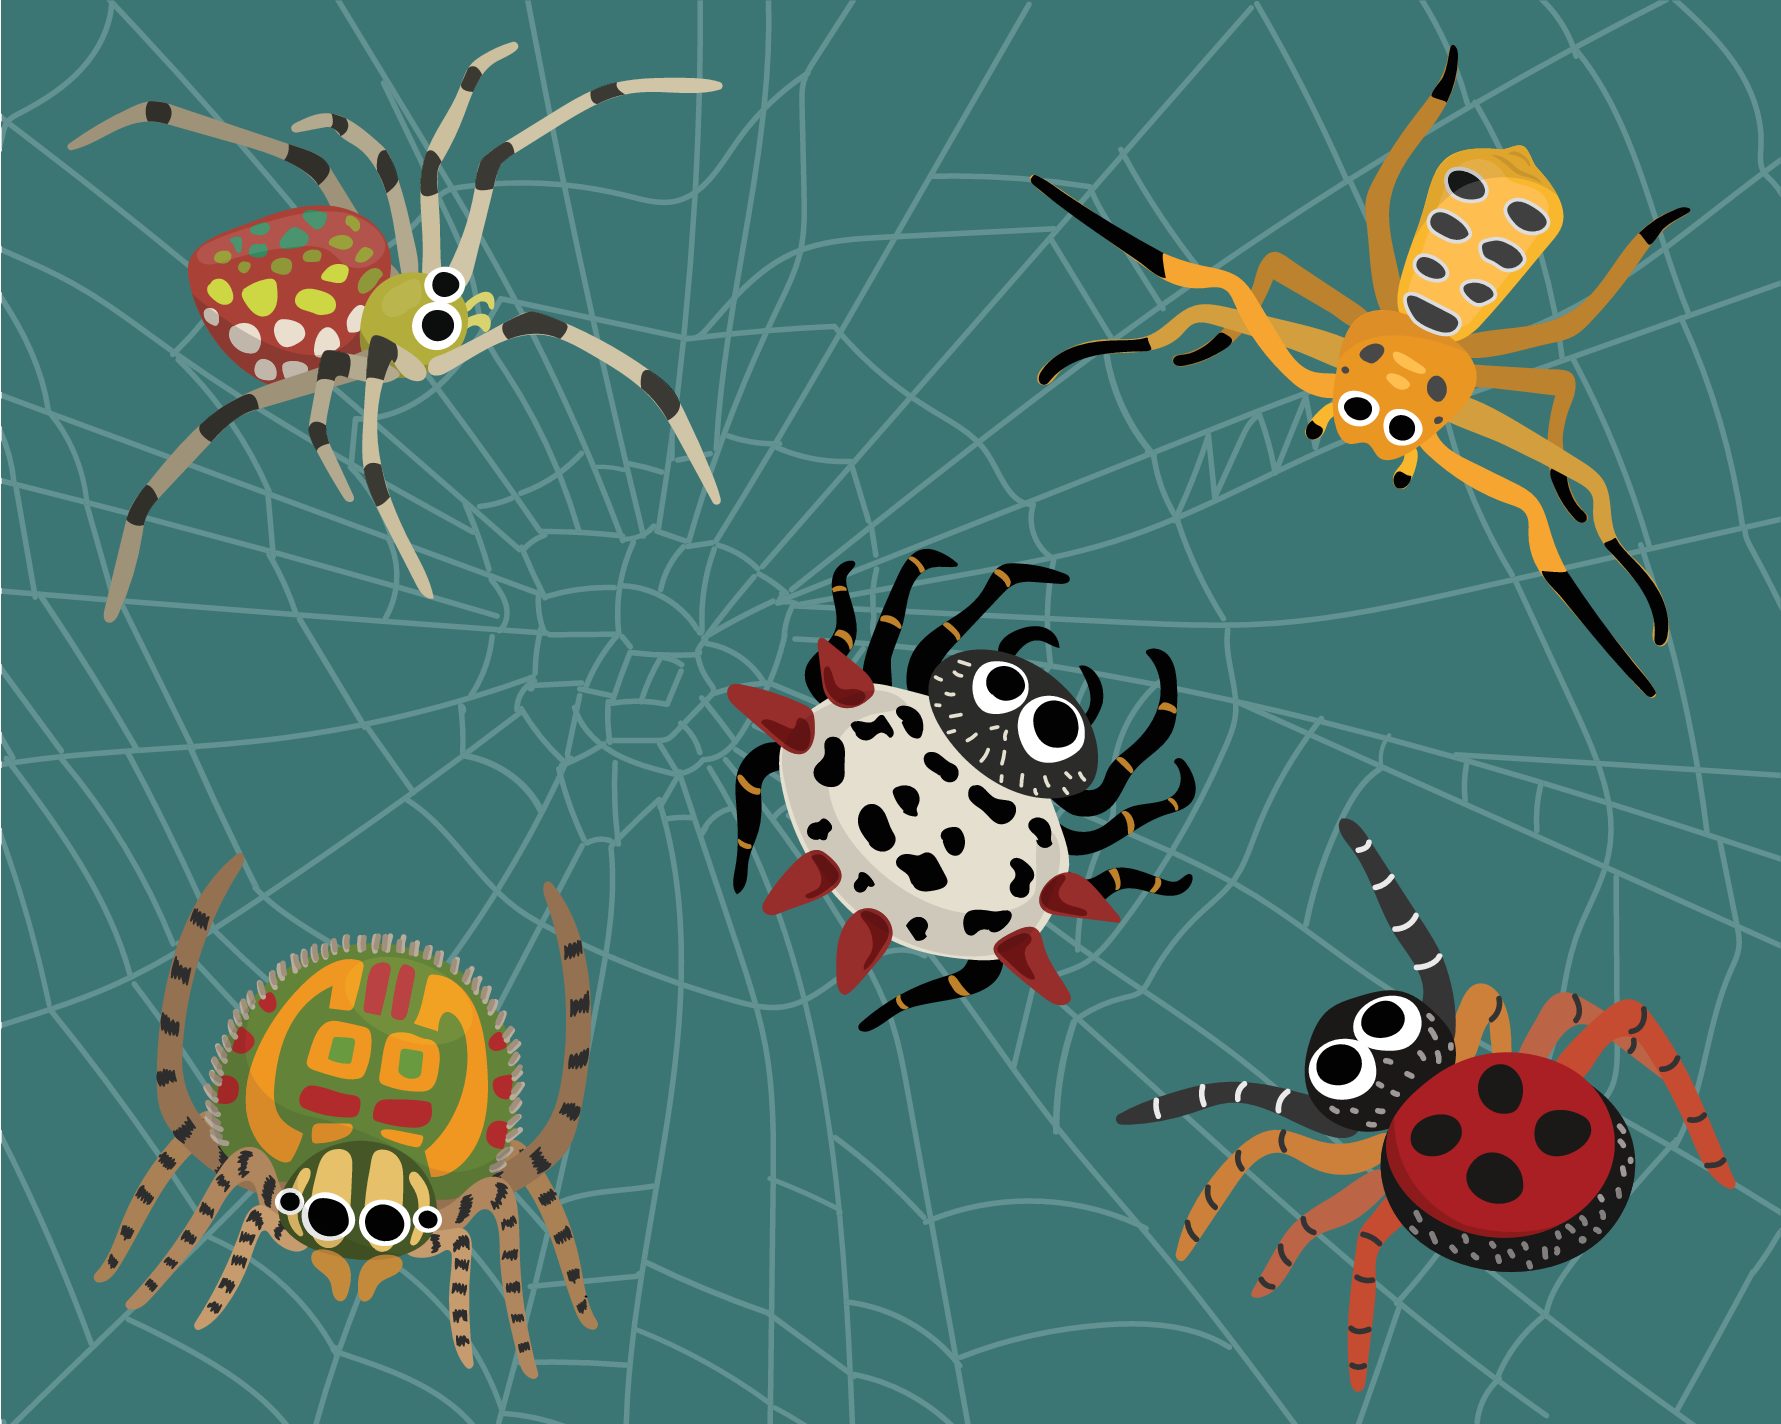 Keep Those Creepy Spiders Out Of Your Home Yikes!